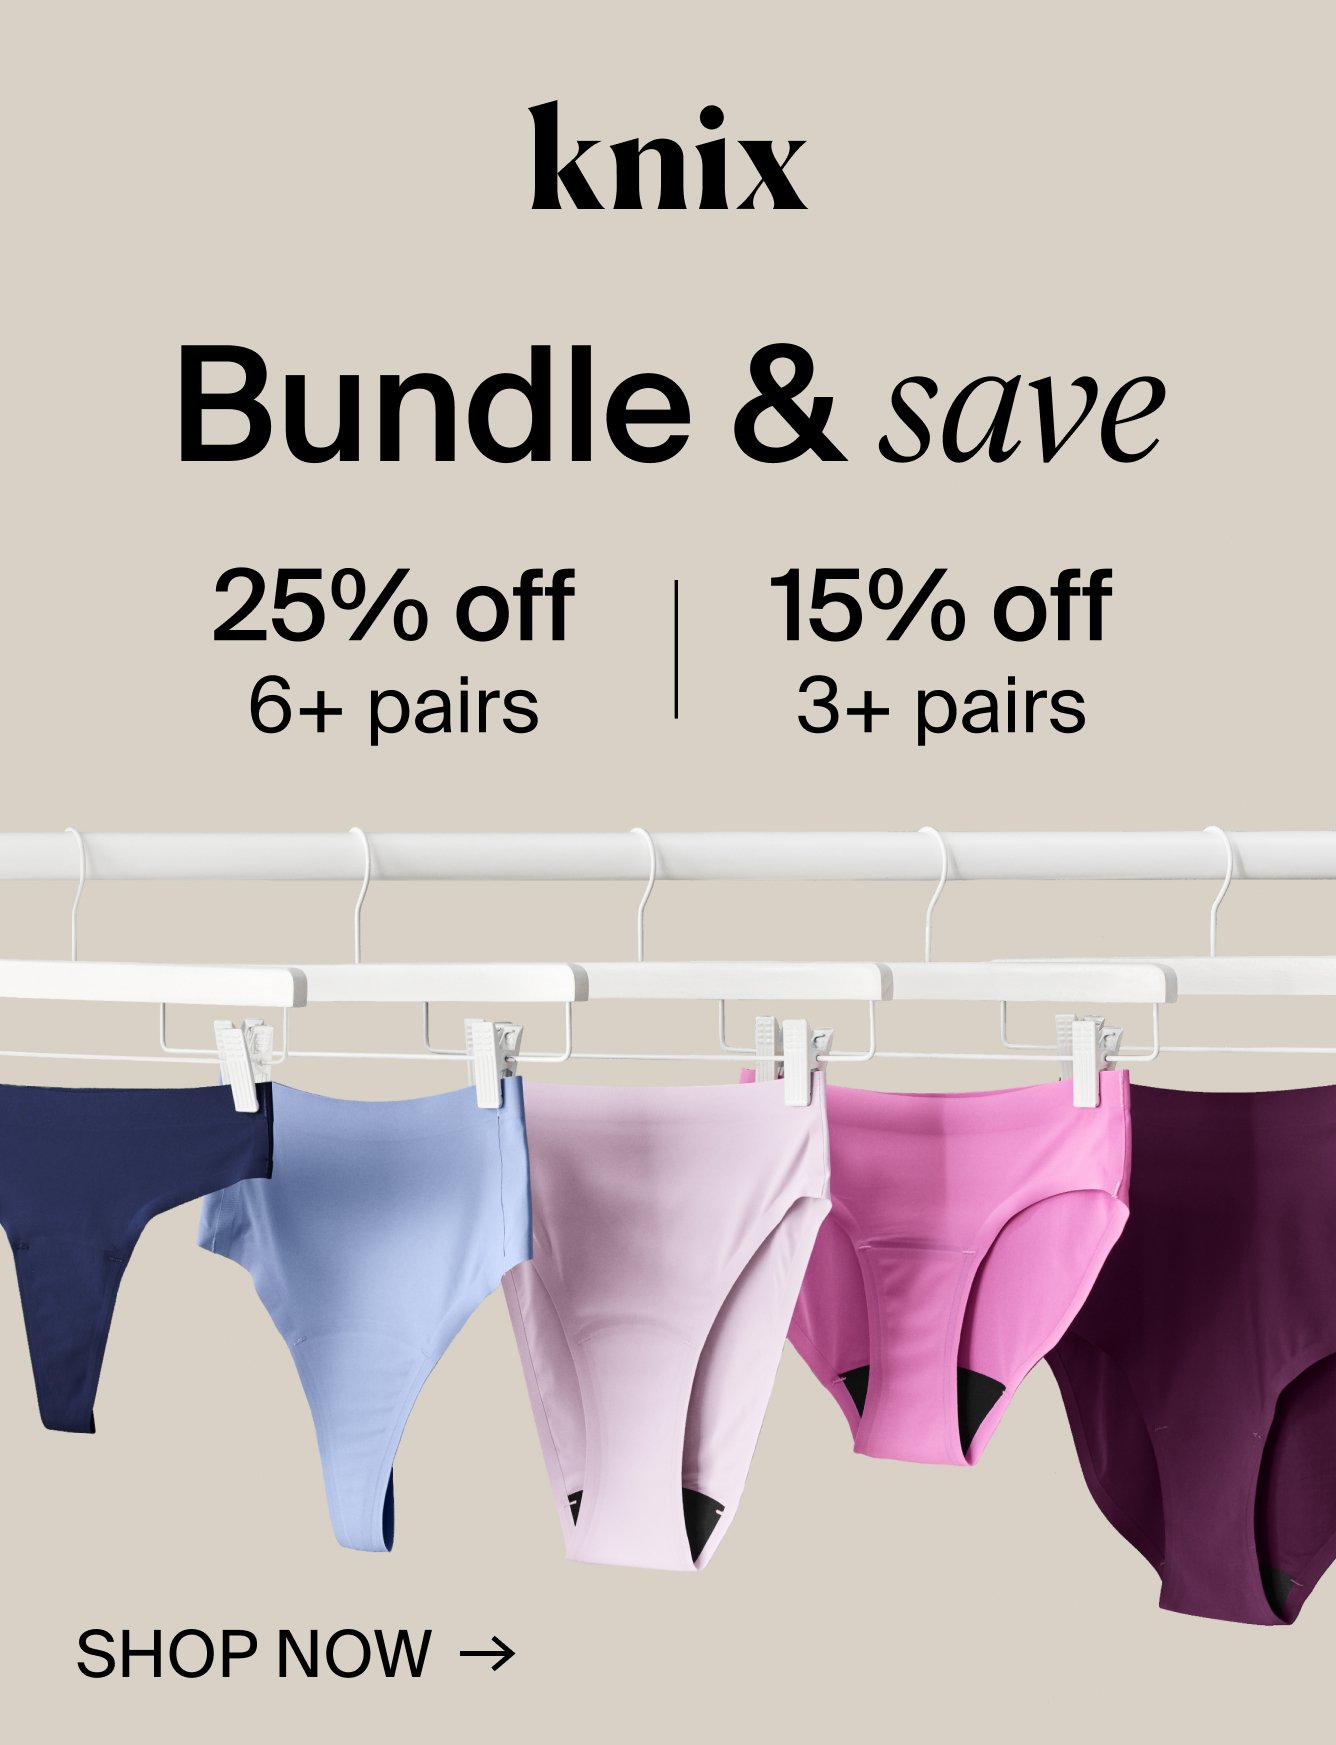 Knix: Bundle & save: 25% off 6+ pairs, 15% off 3+ pairs. SHOP NOW.